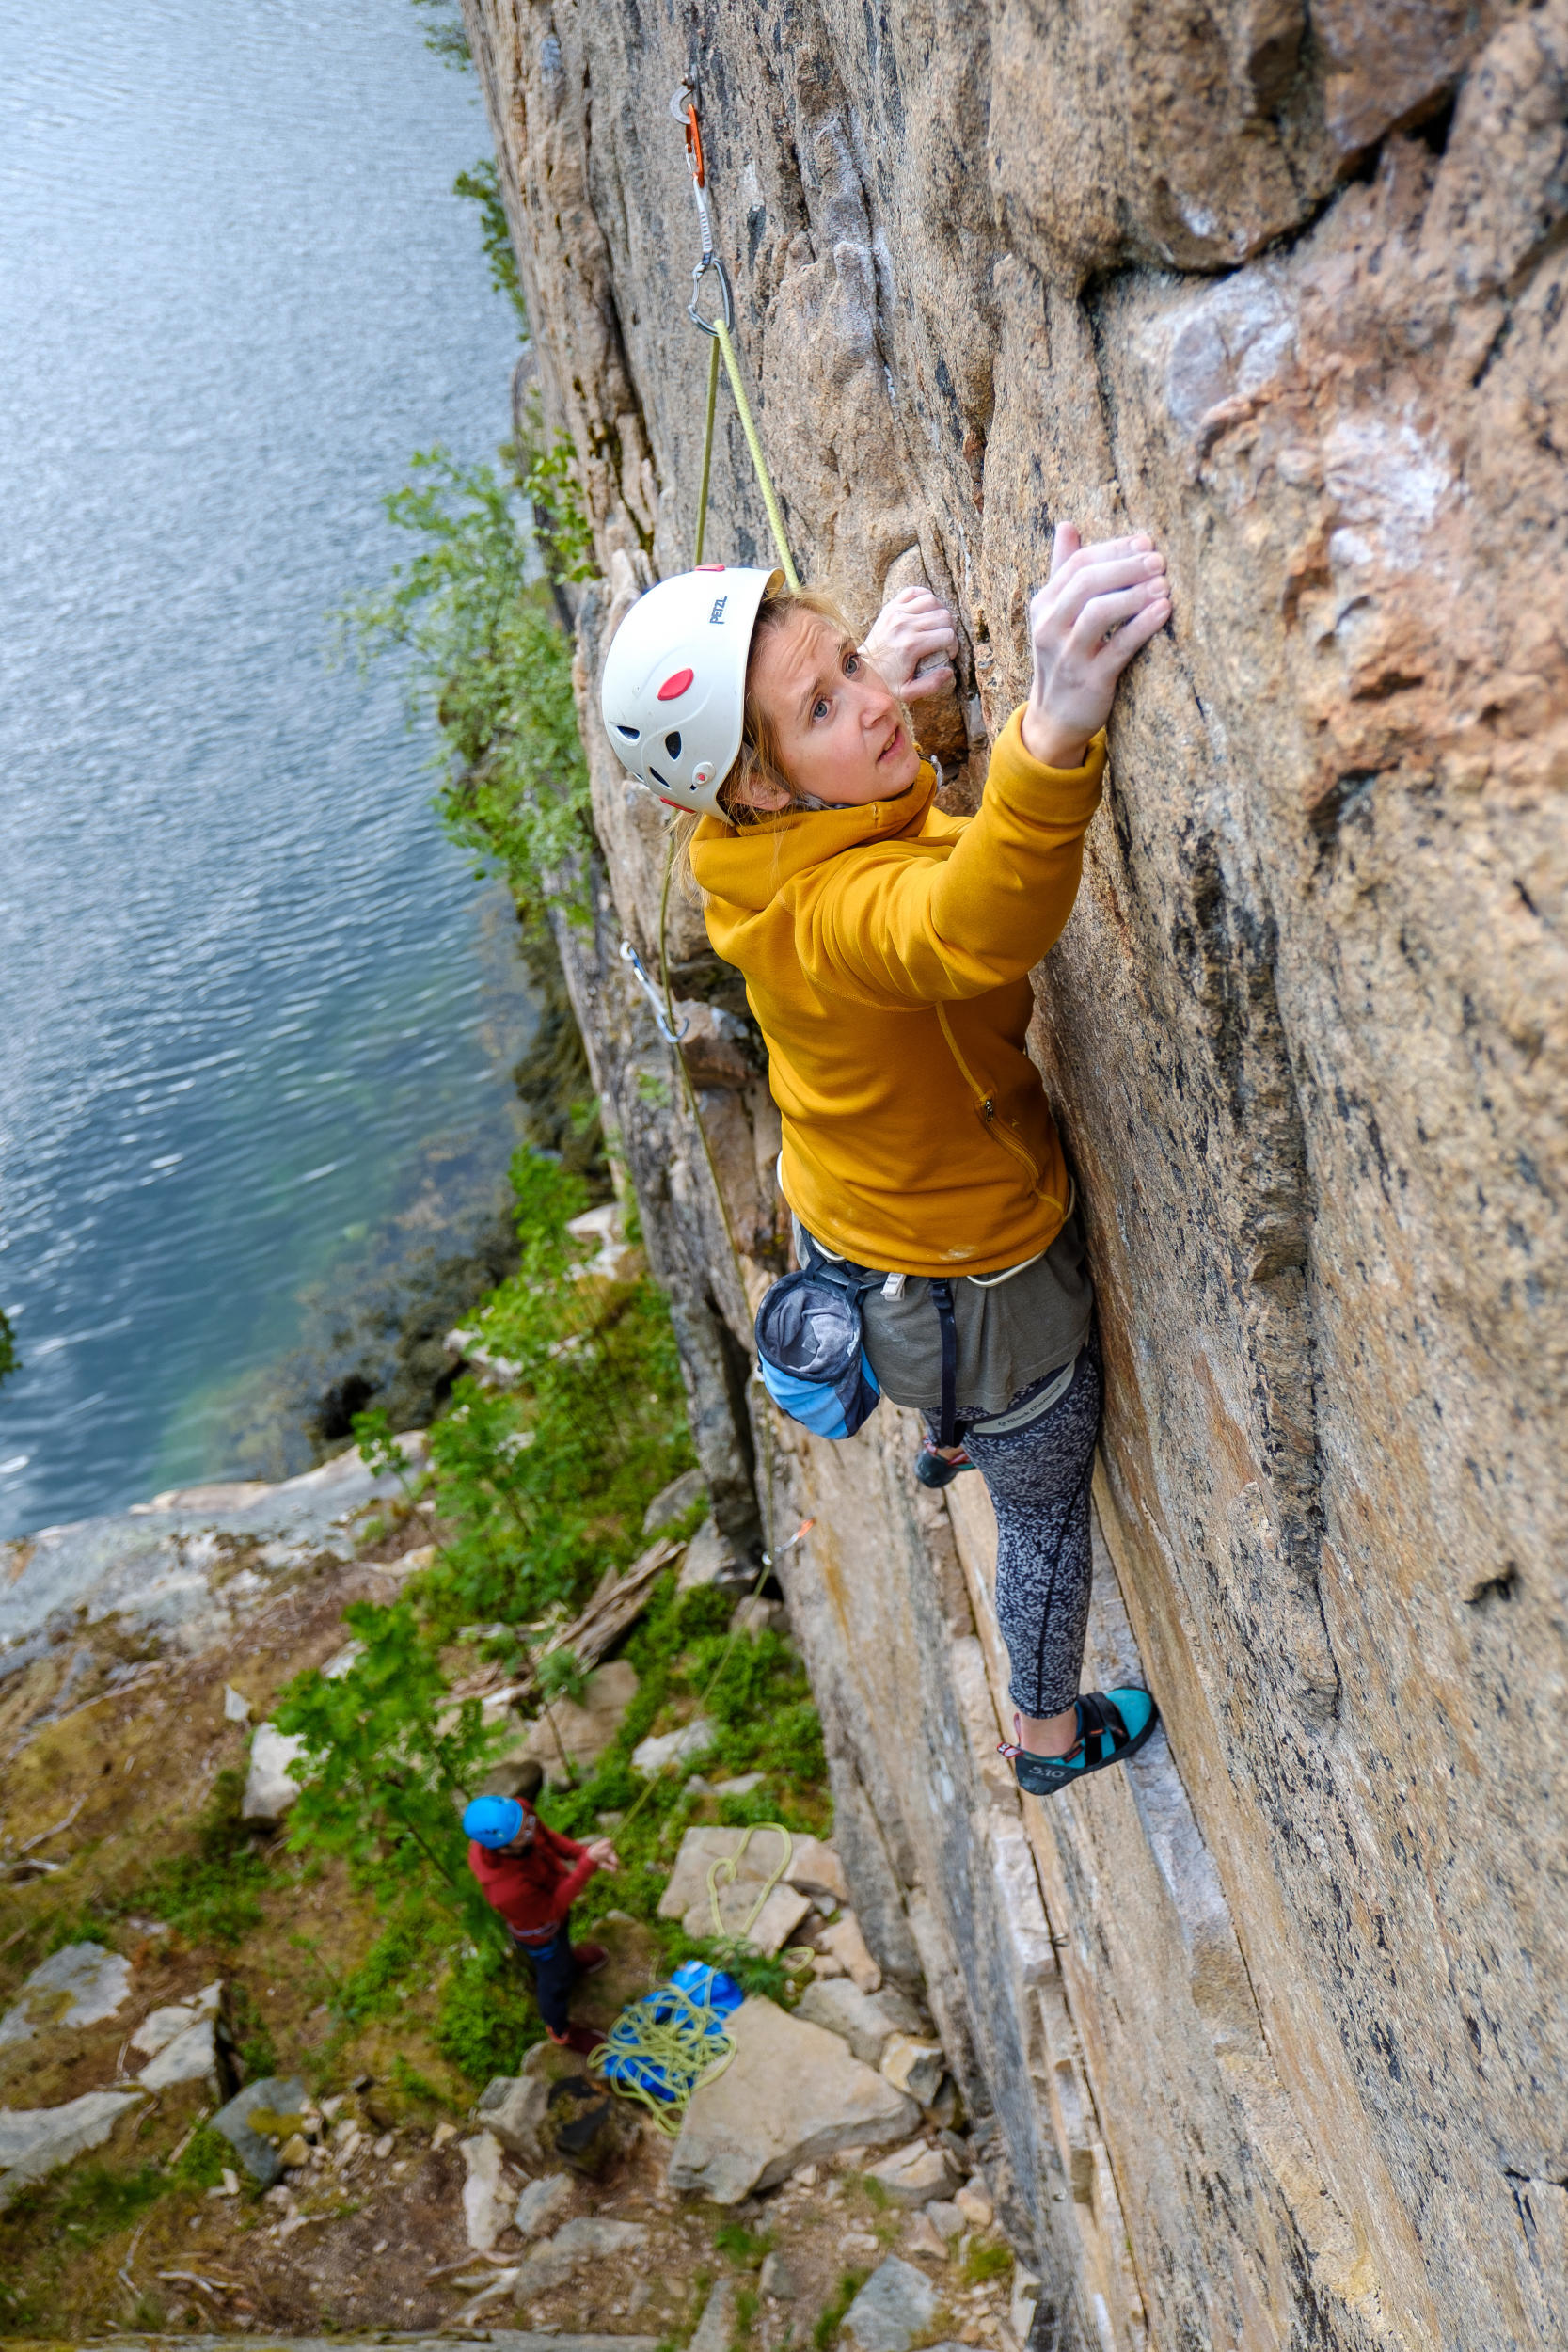 Climbing in Snillfjord, Norway